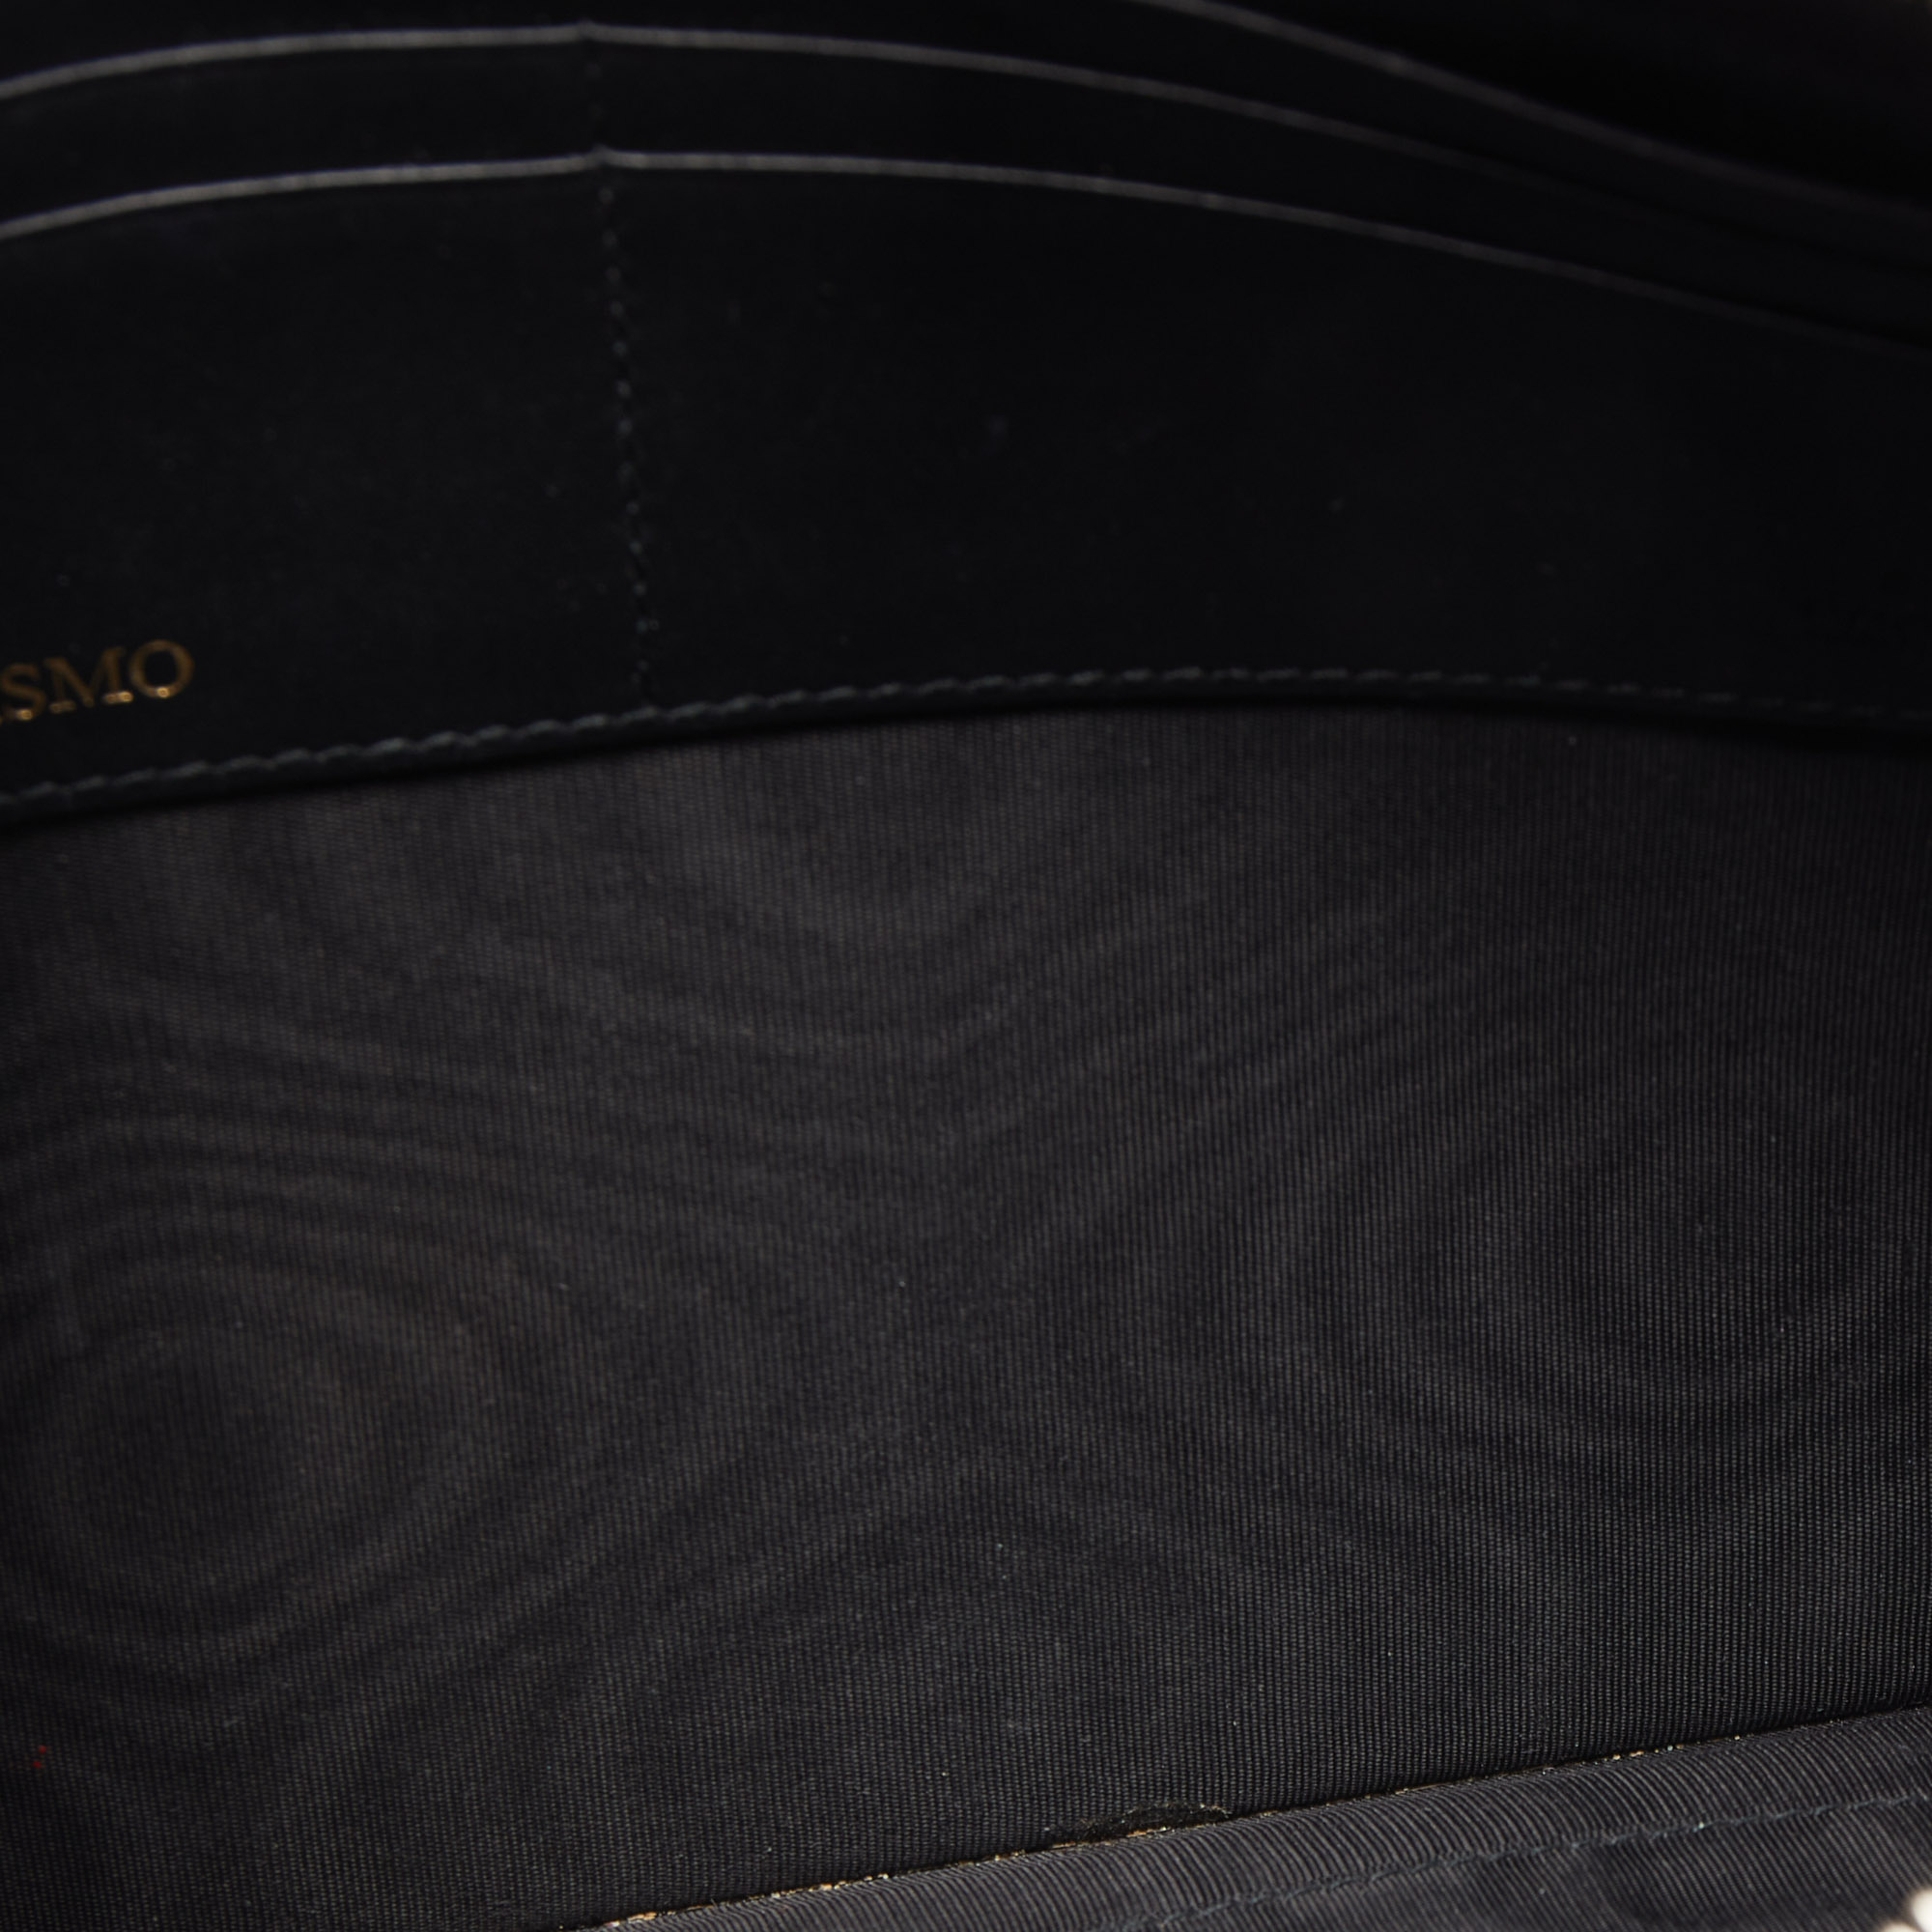 Gucci Black/Gold Leather 'Guccy' Zip Wristlet Clutch